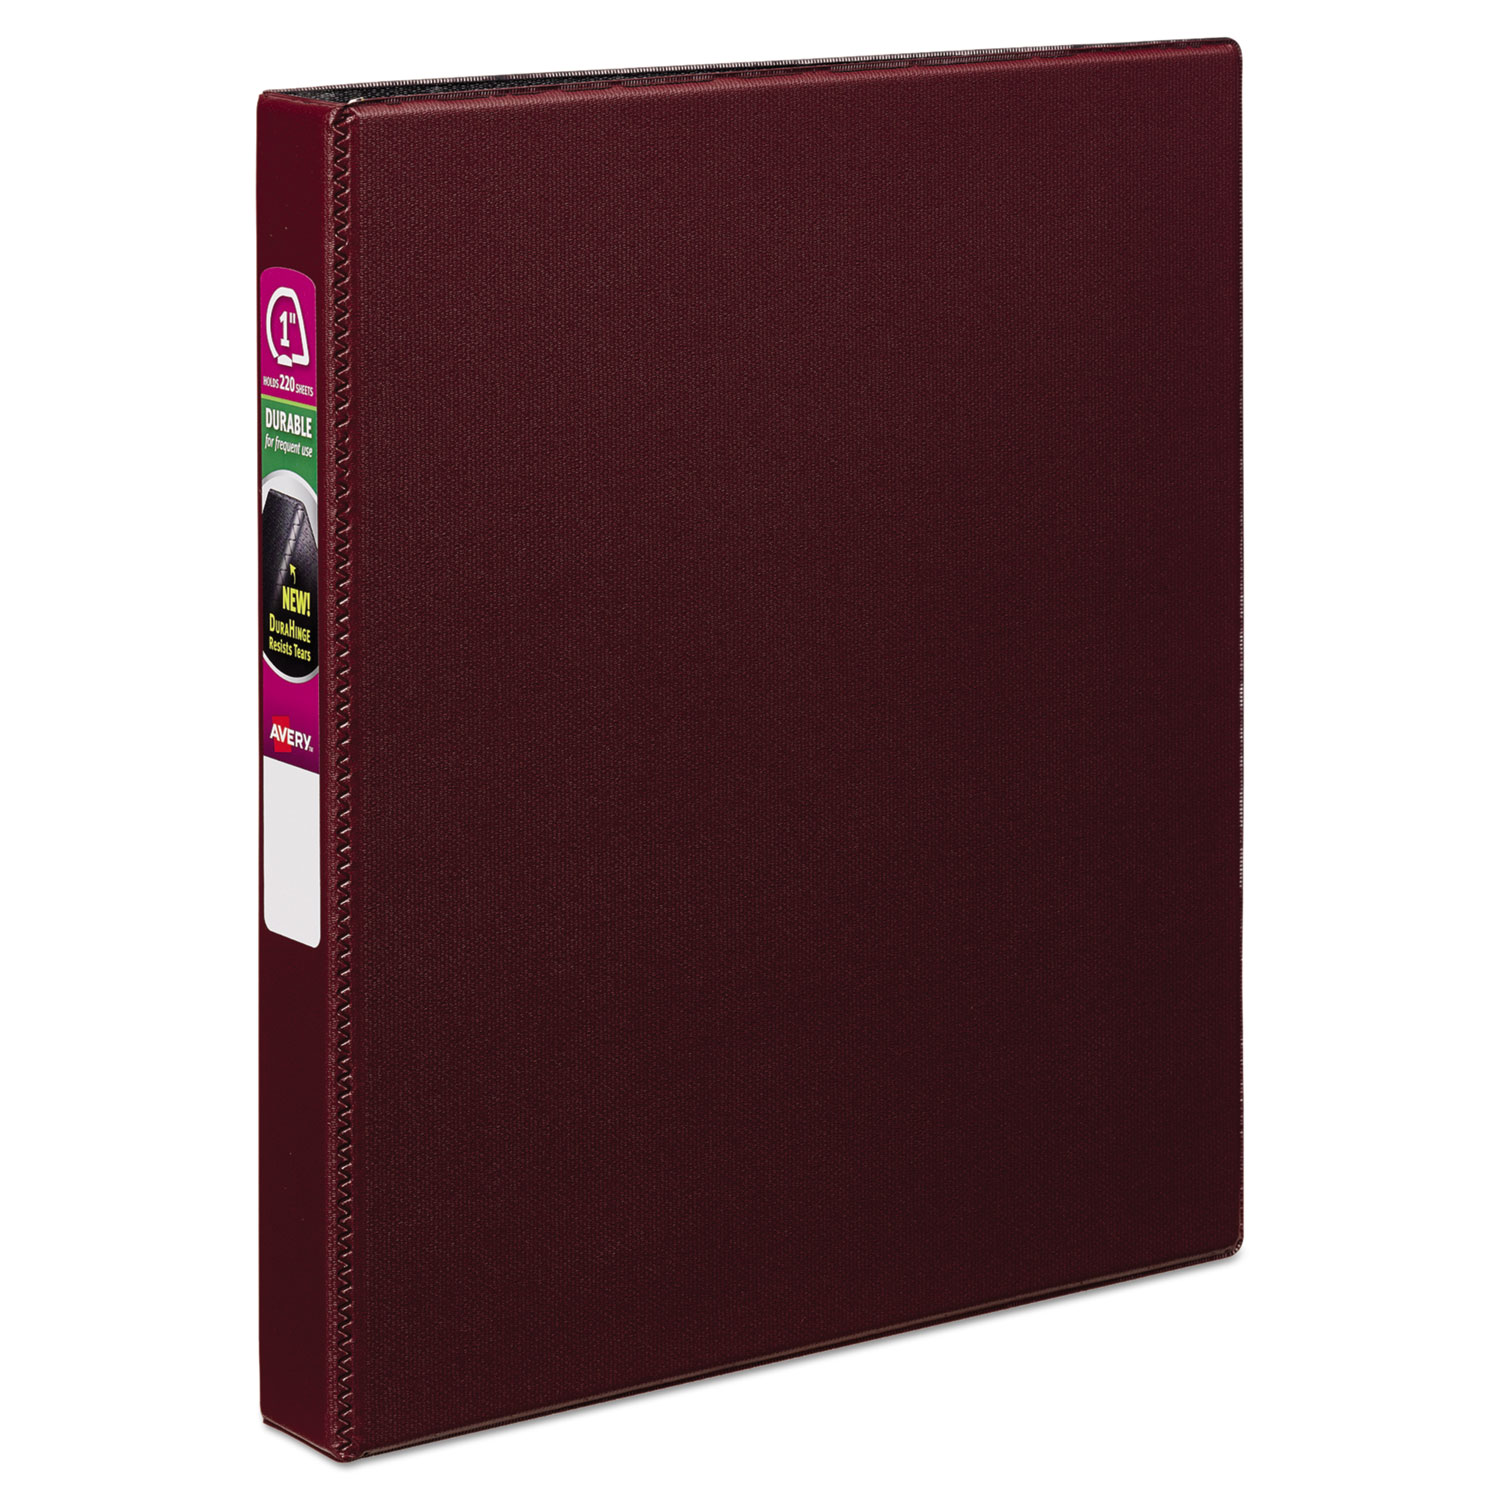  Avery 27252 Durable Non-View Binder with DuraHinge and Slant Rings, 3 Rings, 1 Capacity, 11 x 8.5, Burgundy (AVE27252) 